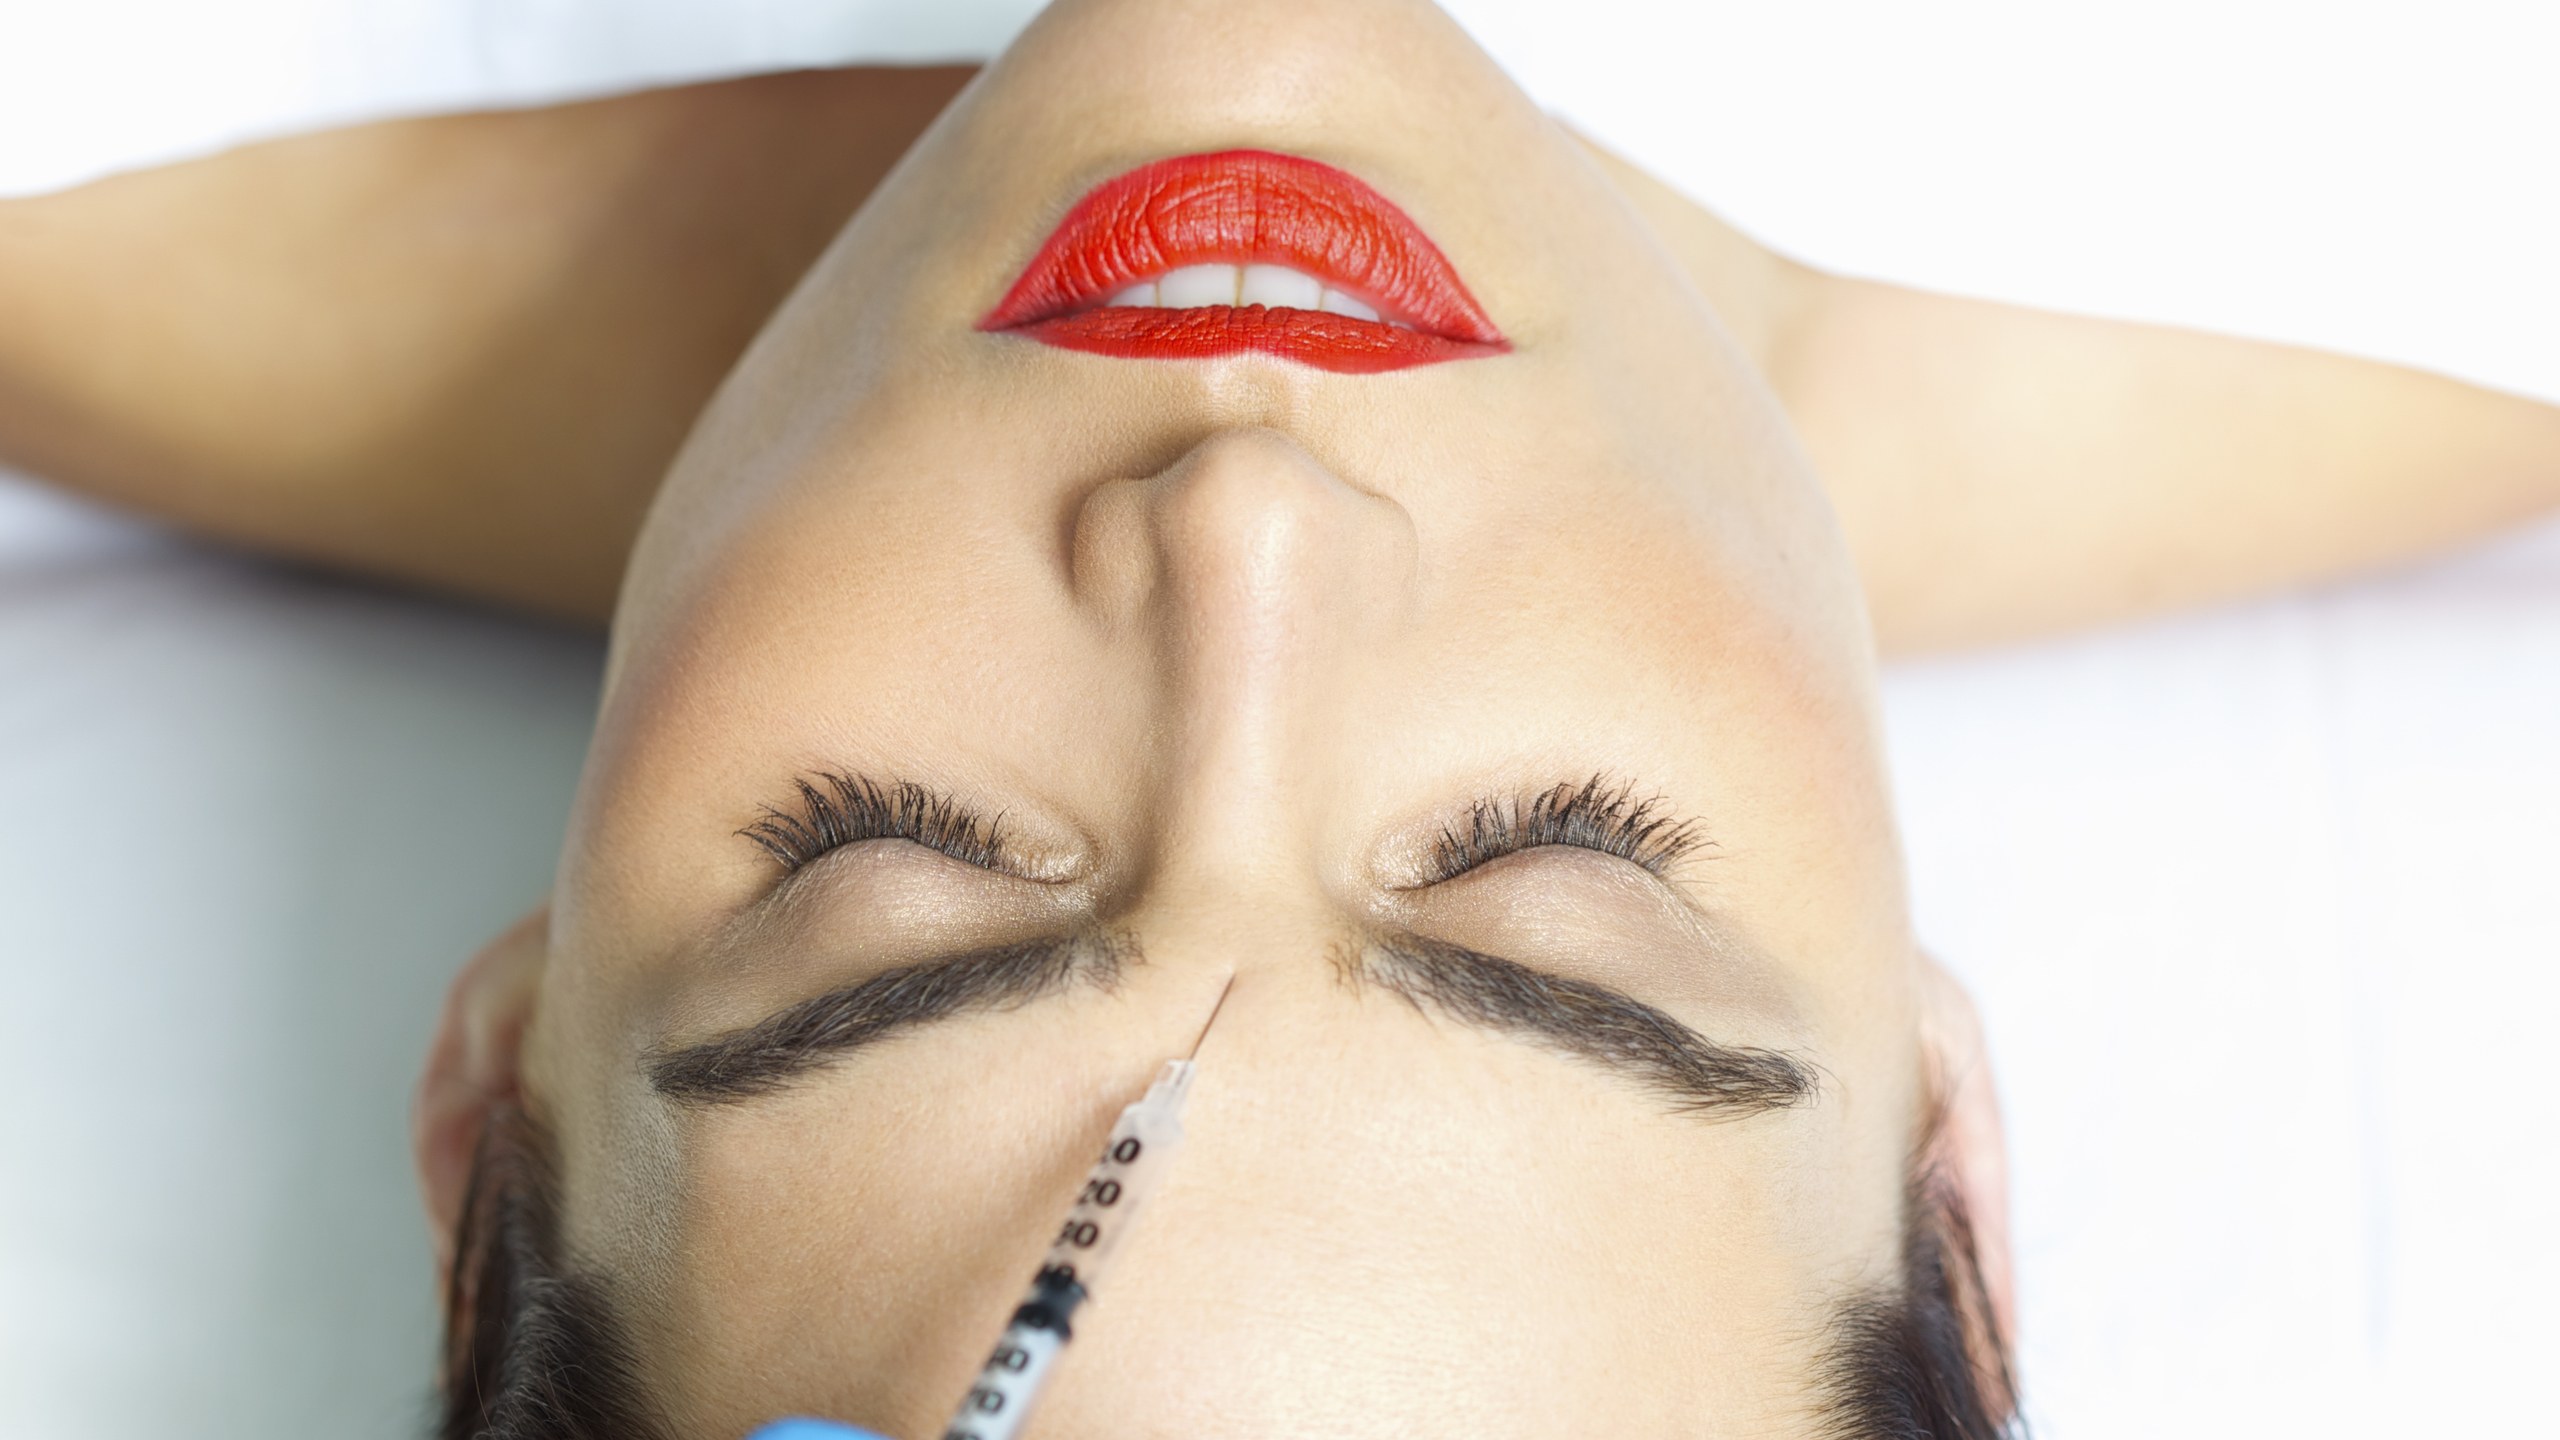 This Is The Age You Should Start Preventative Botox According To